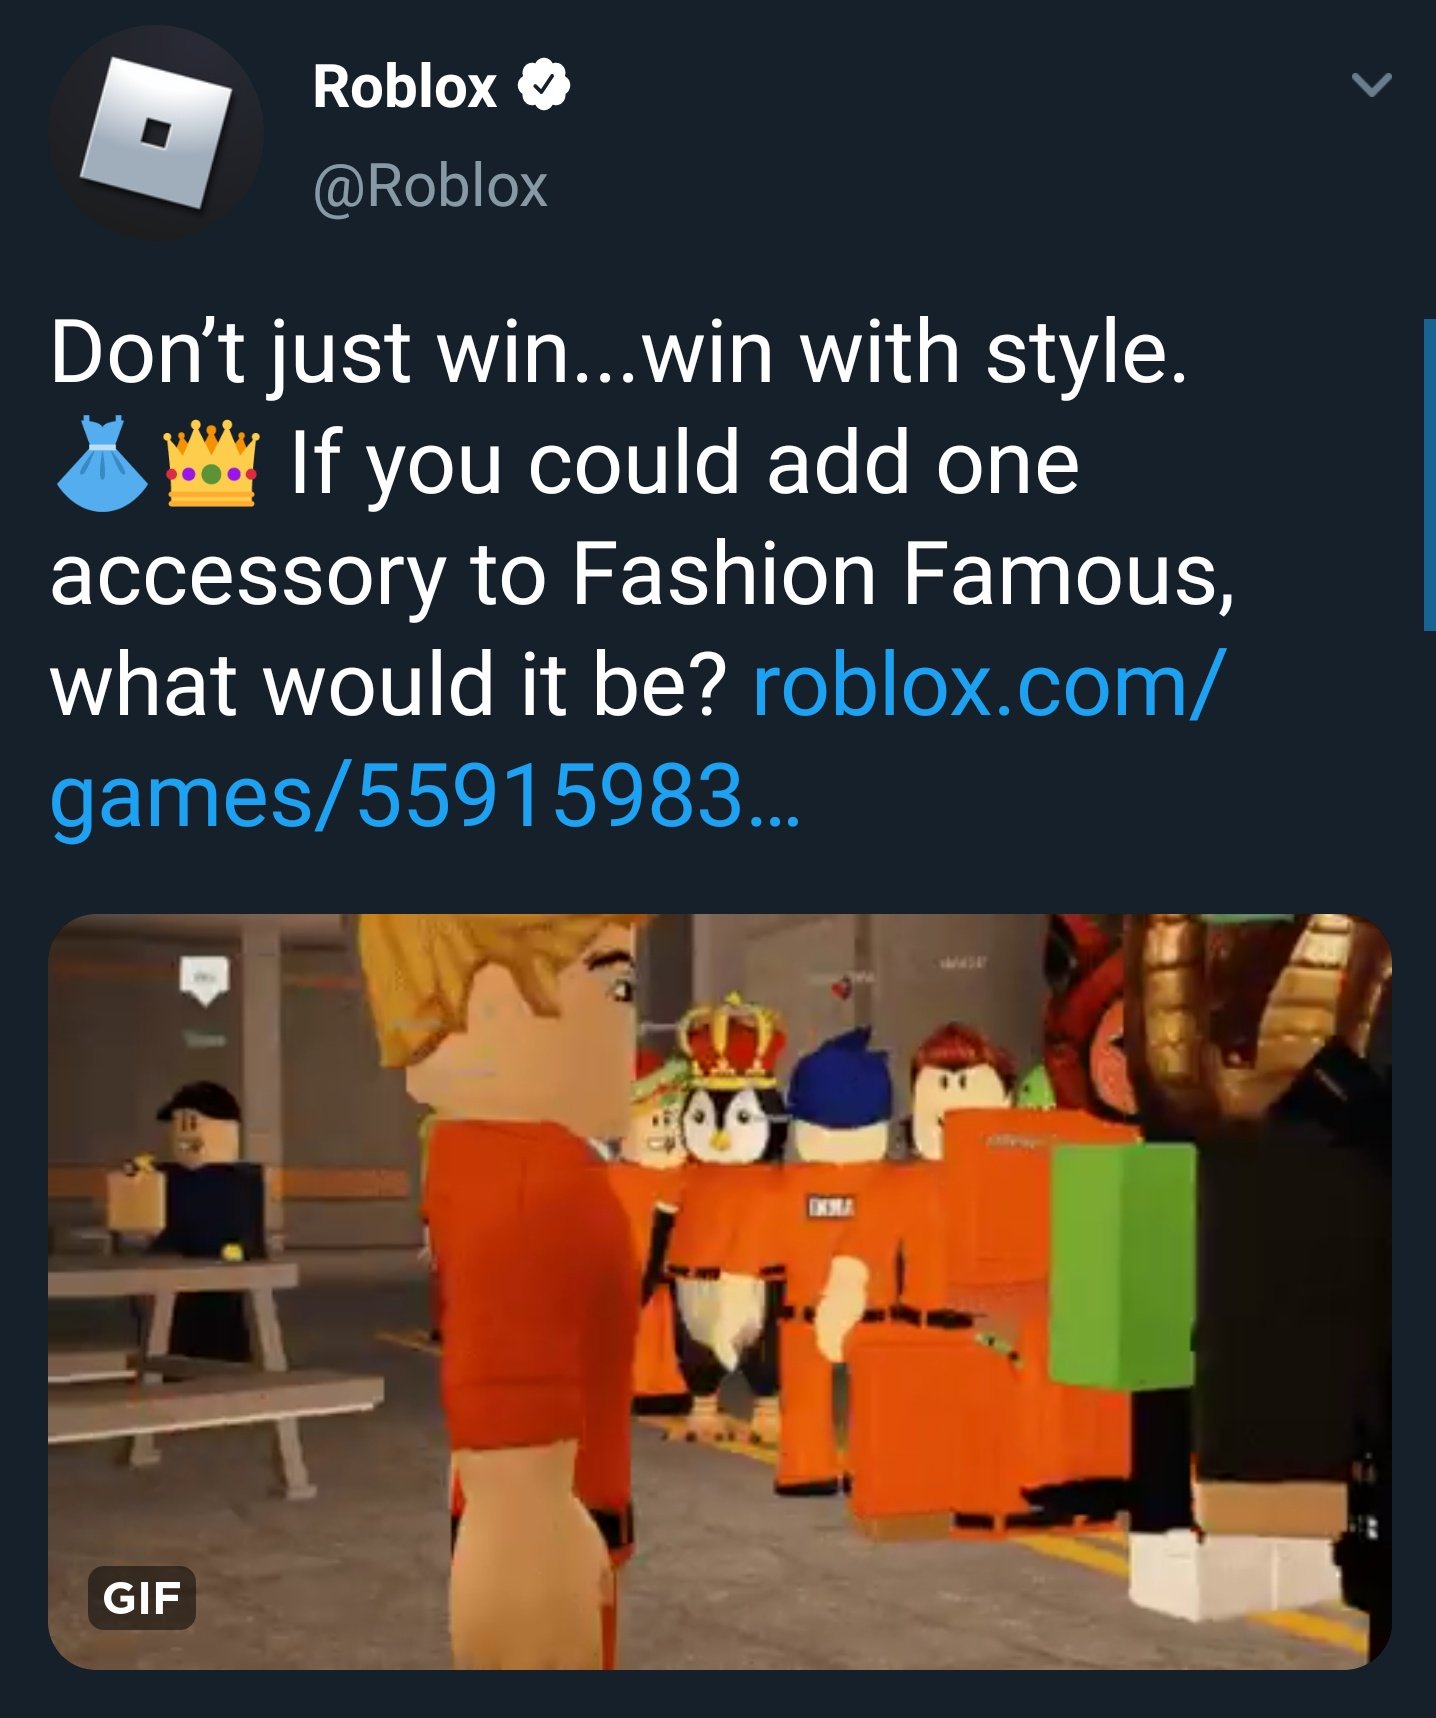 Lord Cowcow On Twitter I M Really Enjoying The New Fashion Famous Prison Update - roblox security guard at mindbot2 twitter